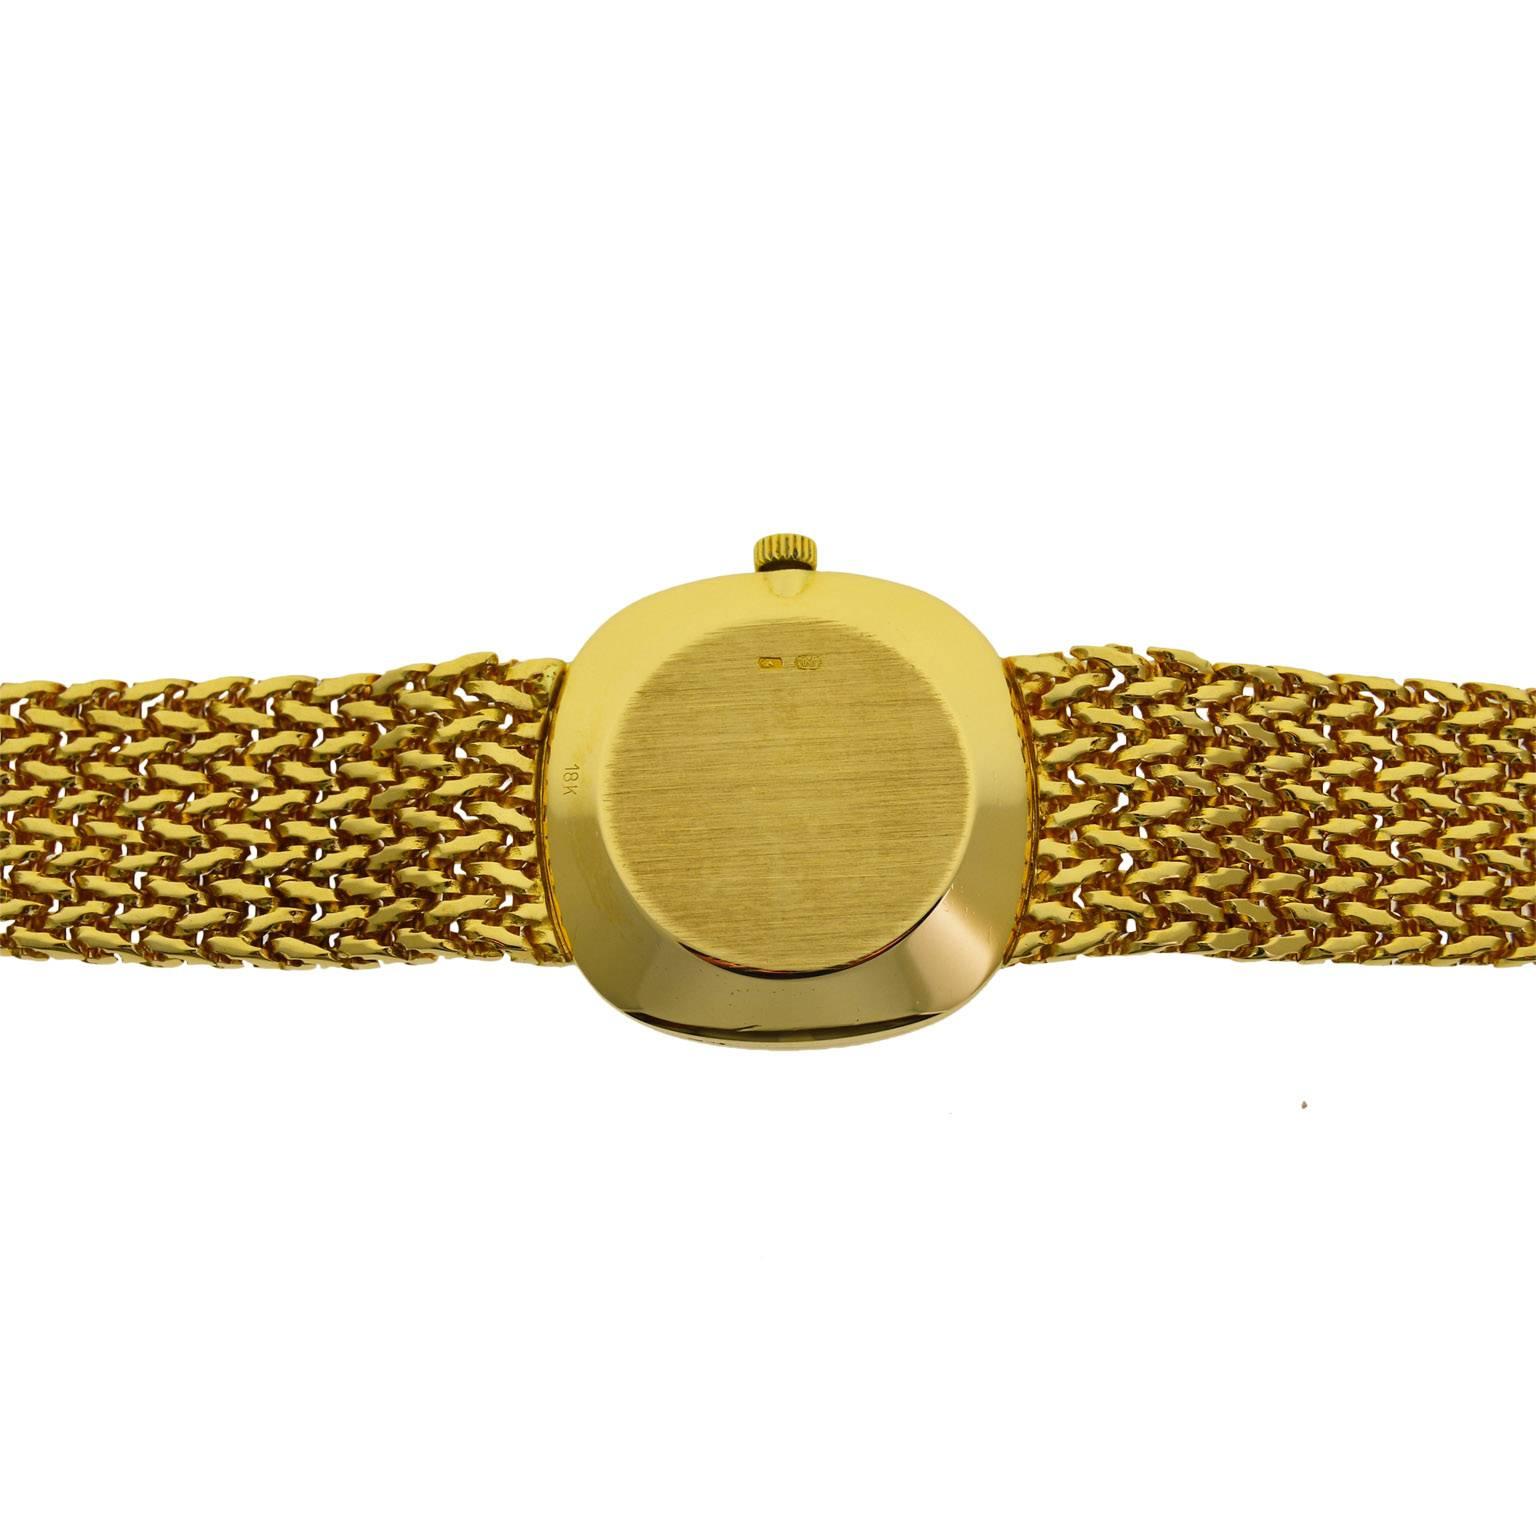 Women's or Men's Patek Ladies Gold Watch with Archival Papers from 1976 Anyone Turning 42 Soon?